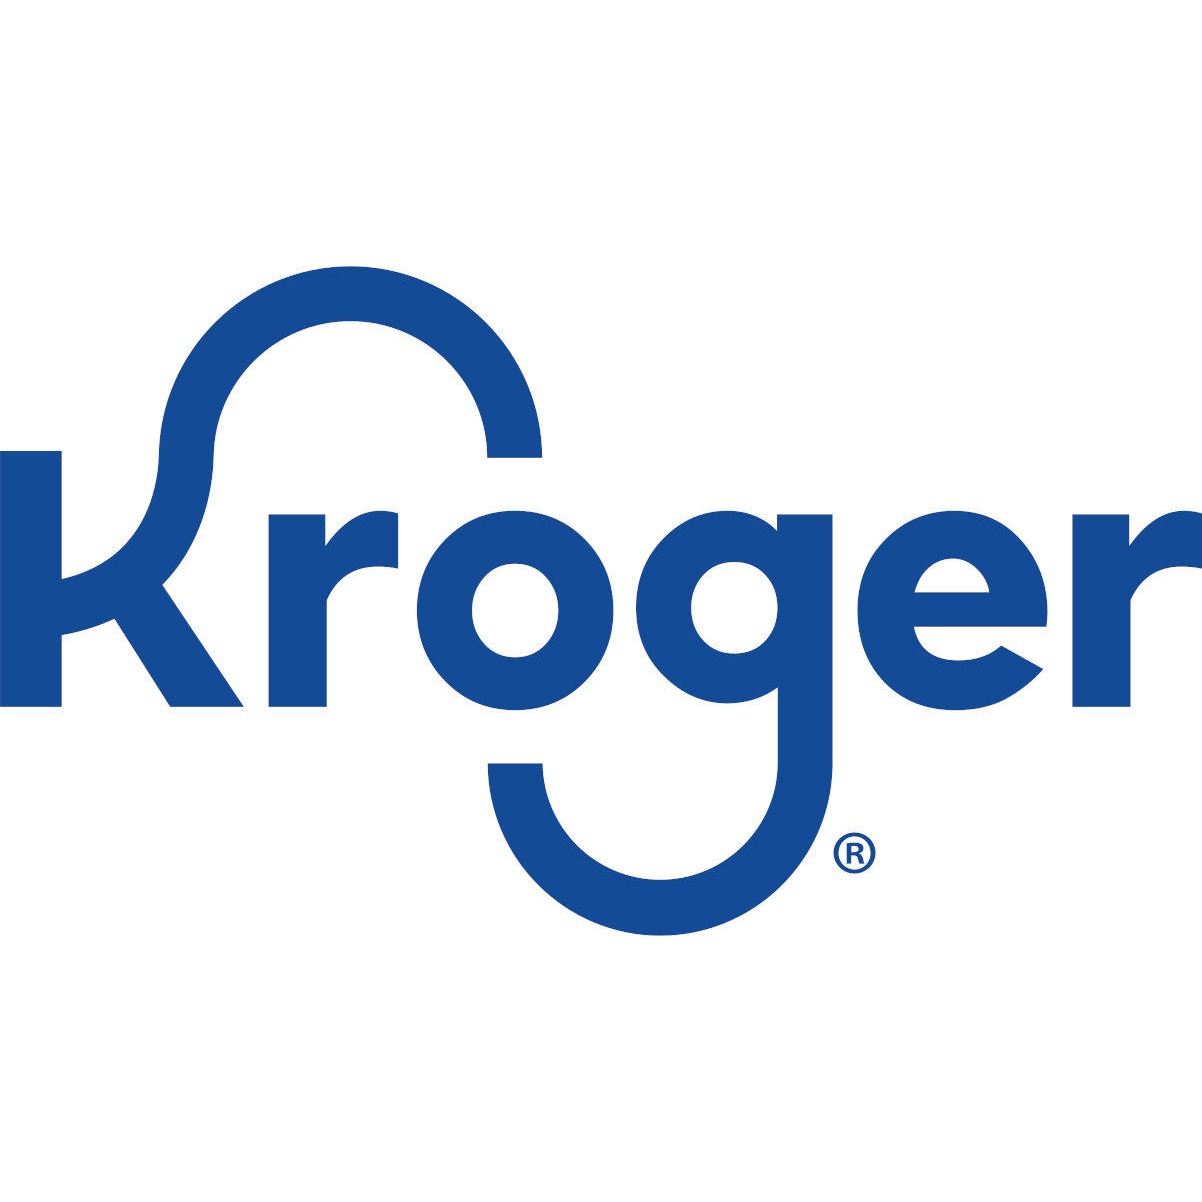 Kroger Grocery Pickup and Delivery